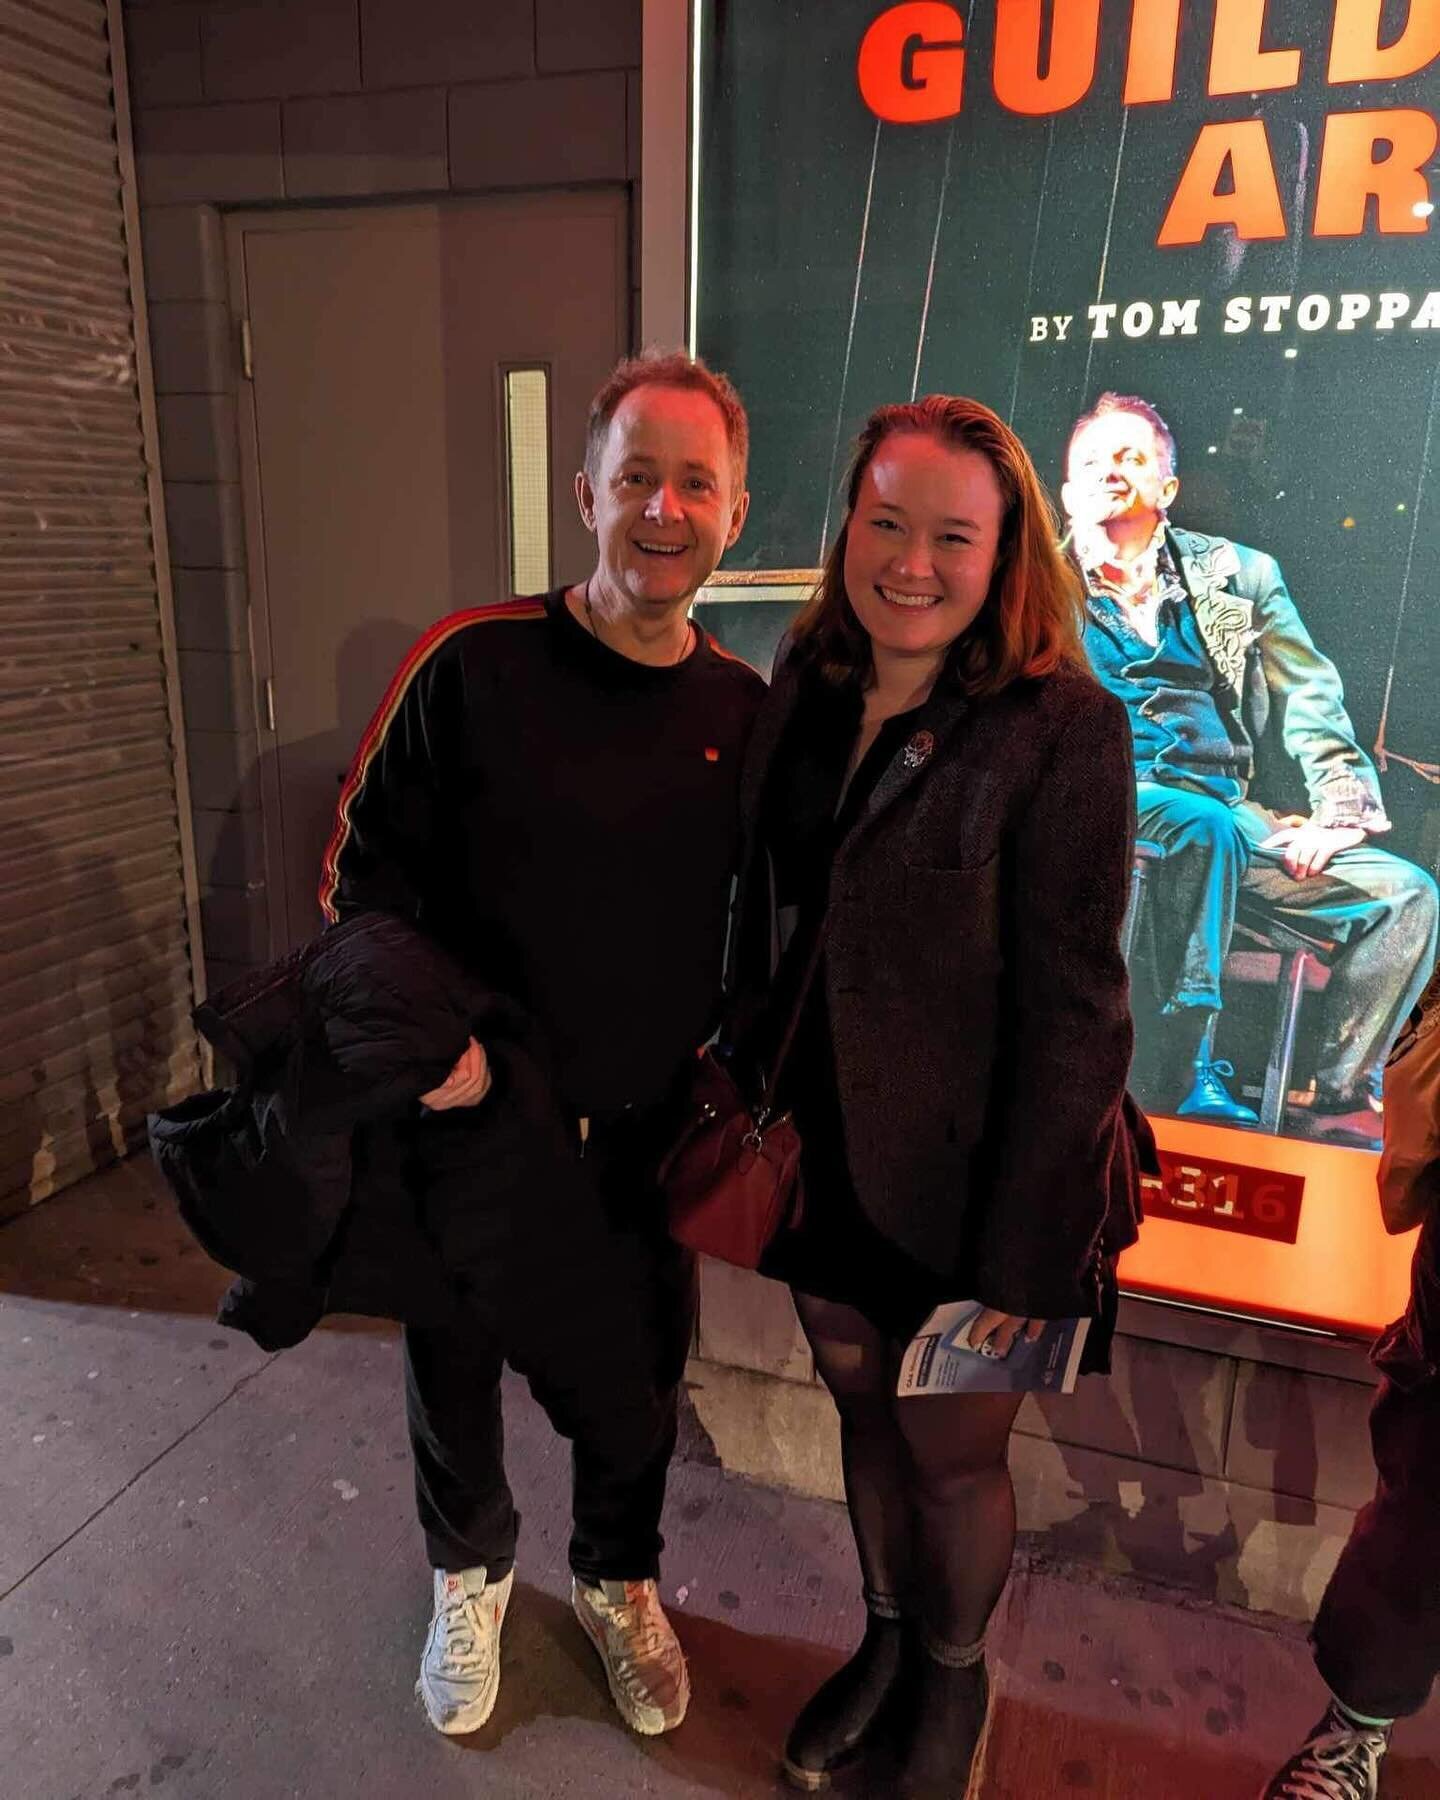 Honestly one of the most overwhelming moments I&rsquo;ve ever had, meeting an adolescent icon and combining two of my greatest loves &mdash; The Lord of the Rings and theater. Pippin was my absolute favorite member of the Fellowship, and Billy Boyd w